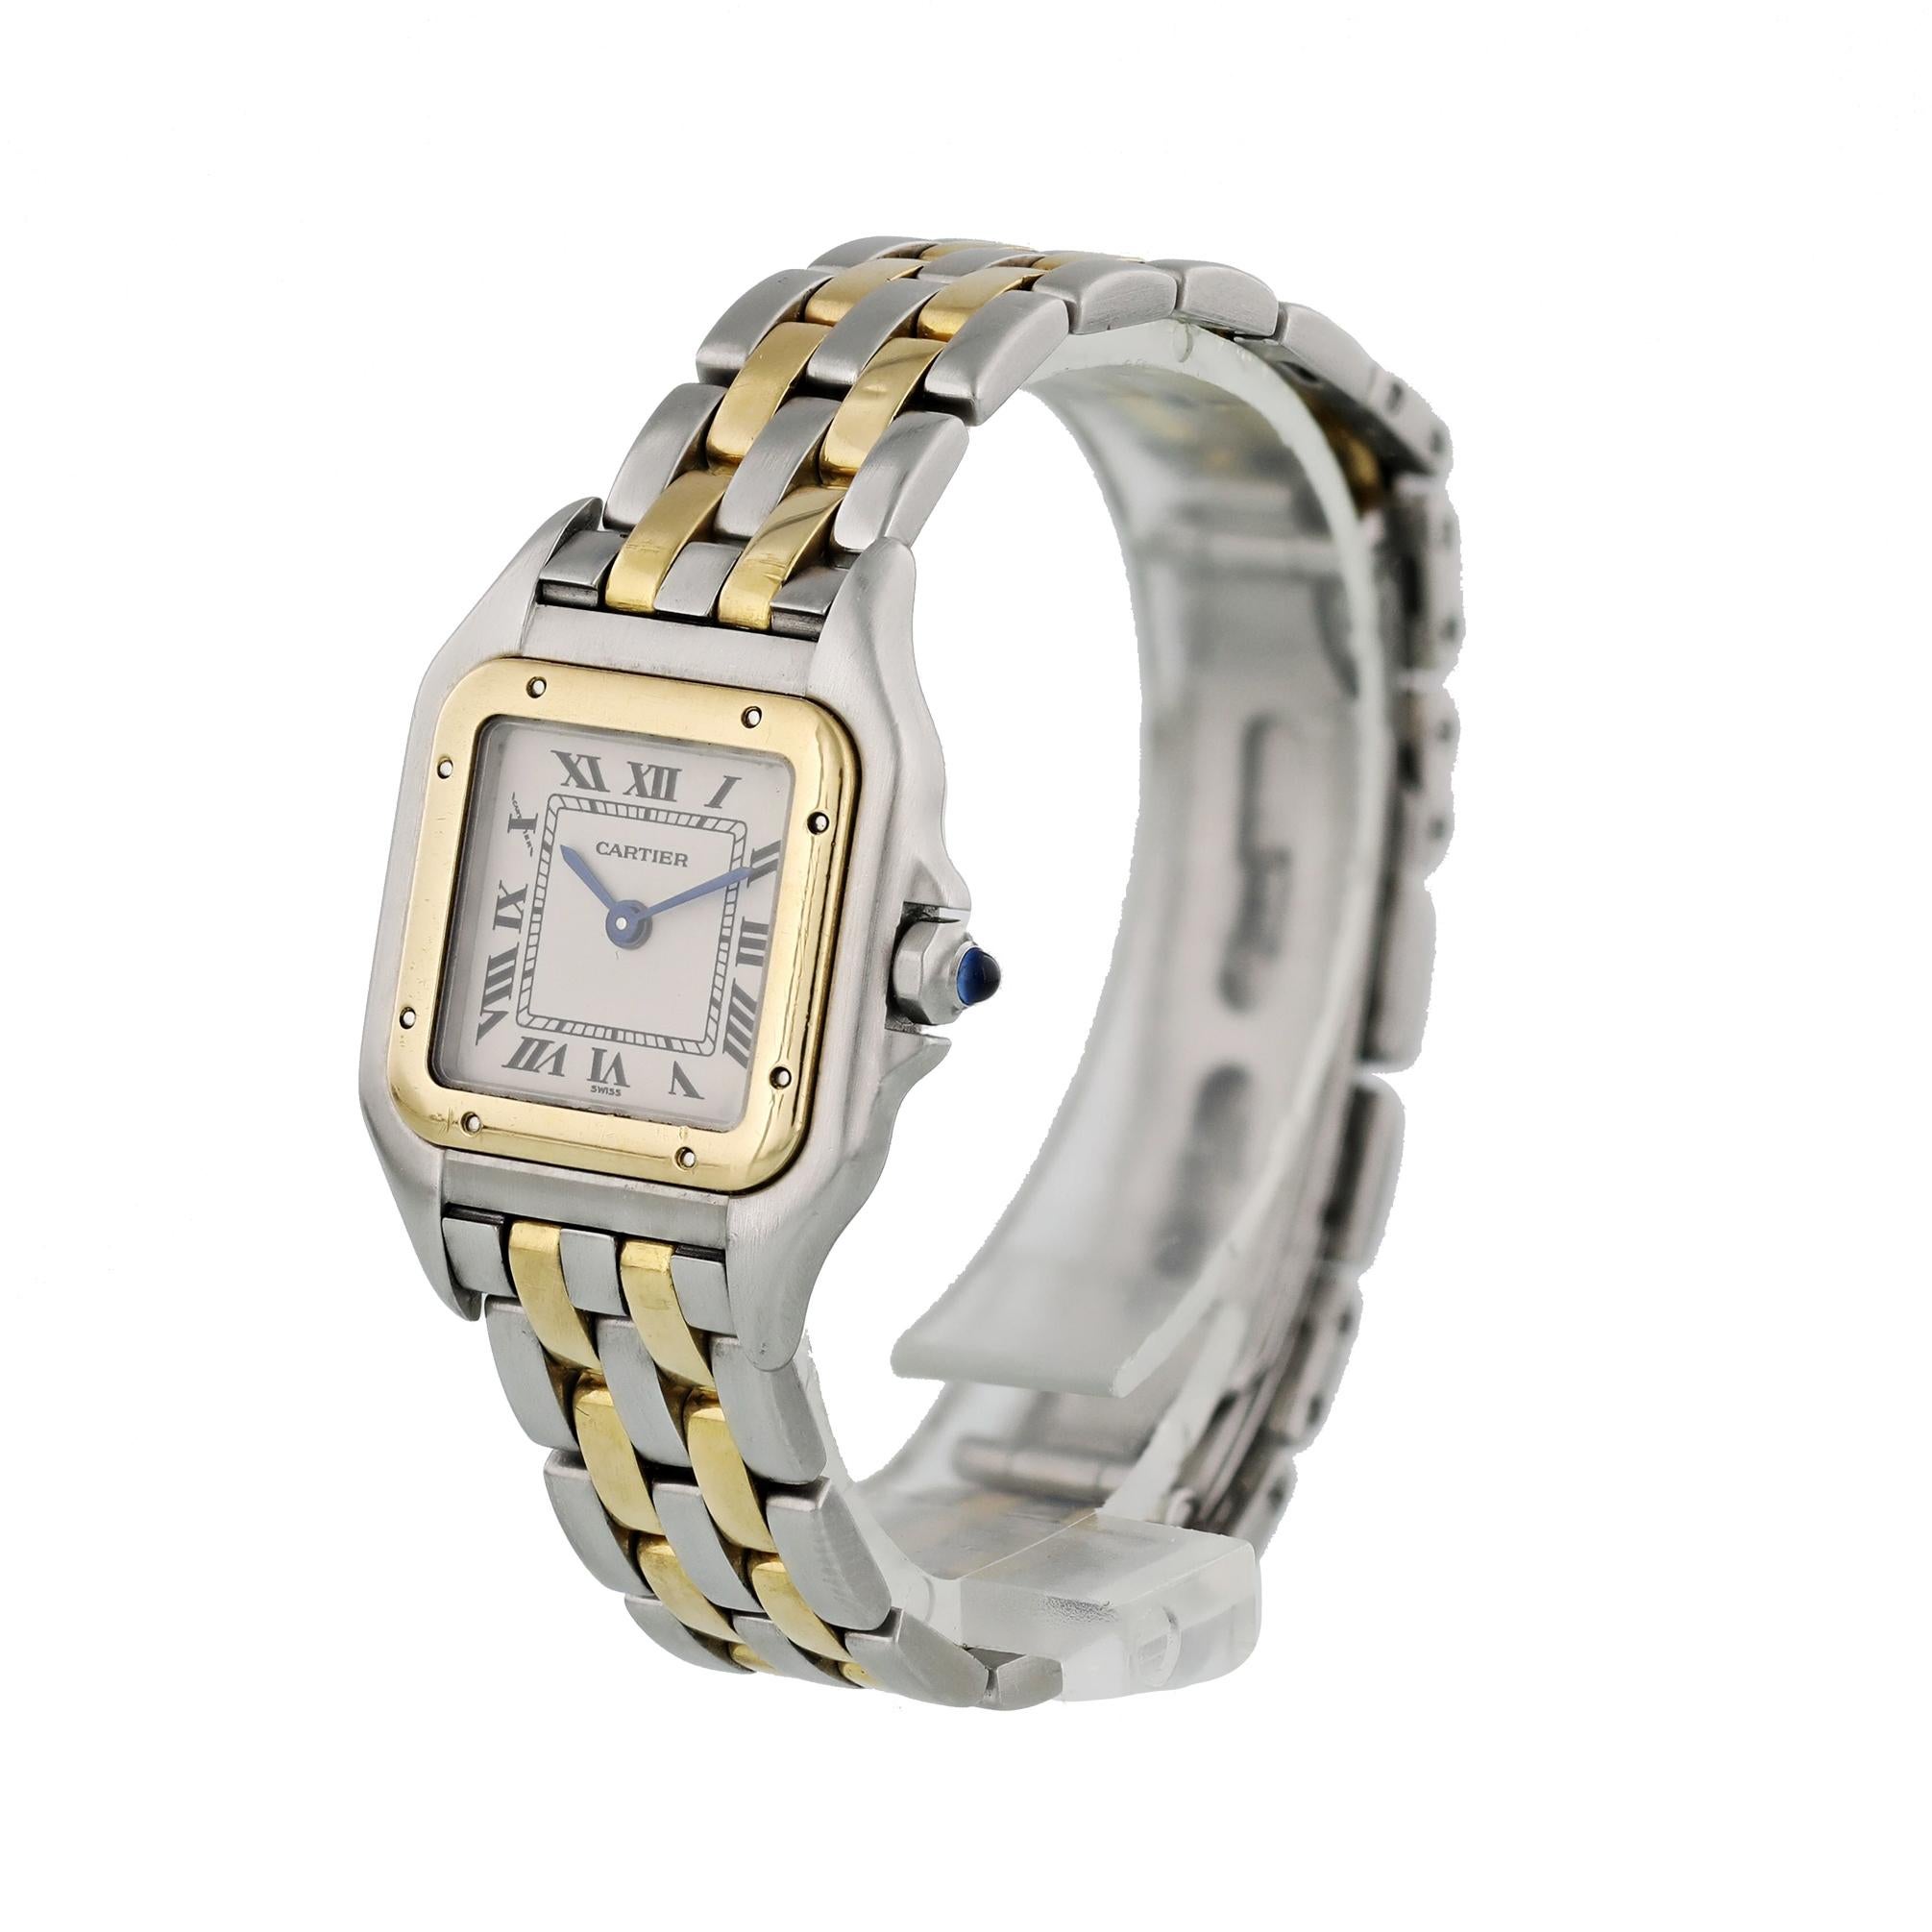 Cartier Panthere 1120 Two-Tone Ladies Watch. 
22mm Stainless Steel case. 
Yellow Gold Stationary bezel. 
Off-White dial with blue steel hands and black Roman numerals Hour Markers. 
Minute markers on the inner dial. 
Two-Tone Stainless Steel